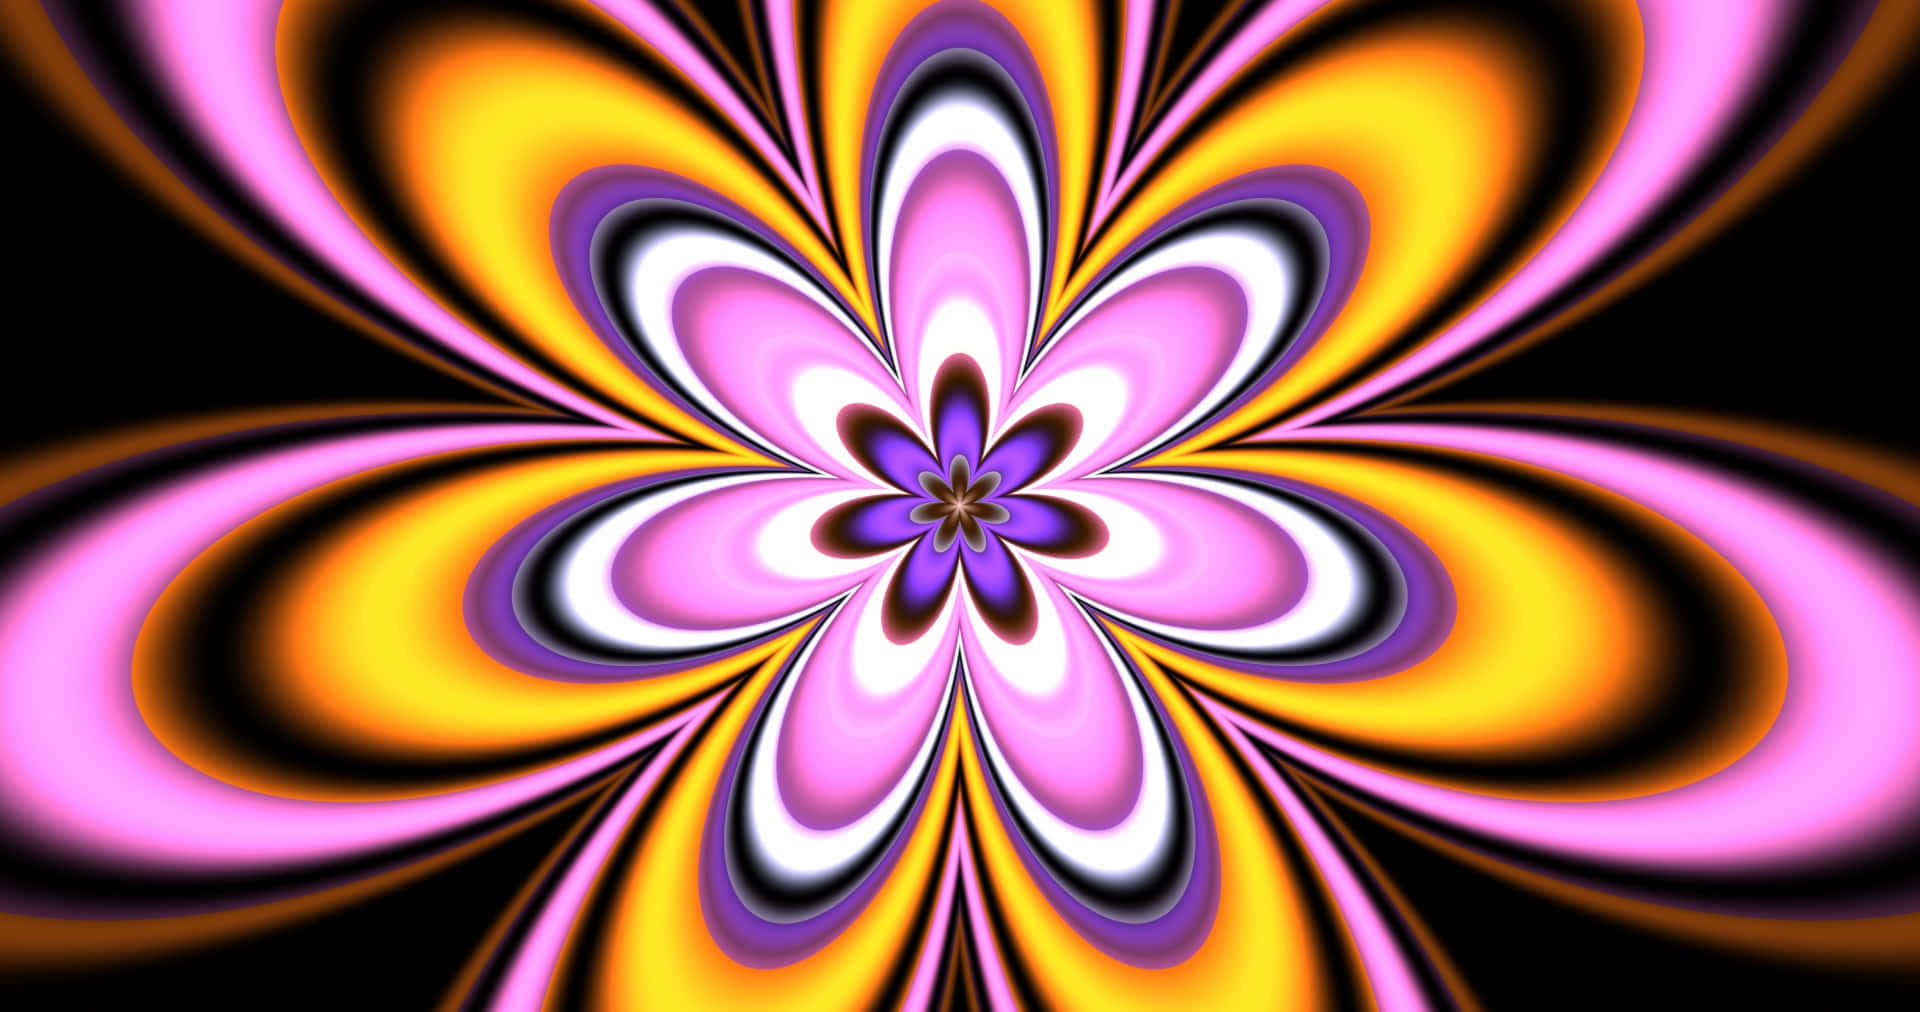 Vibrant Psychedelic Flower Explosion Wallpaper